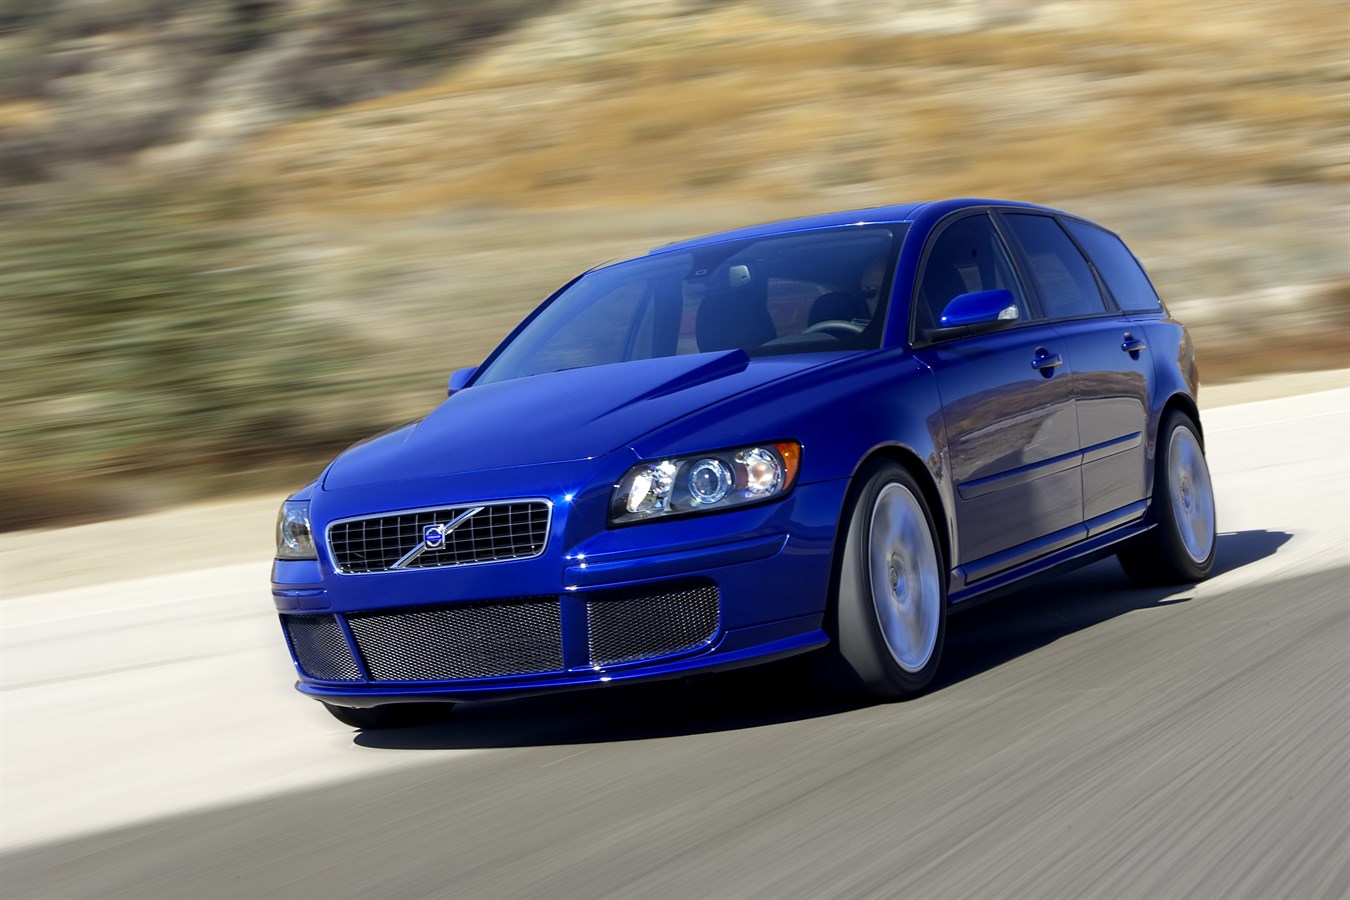 Hot-blooded Volvo V50 SV Concept Car Debuts at 2004 Specialty